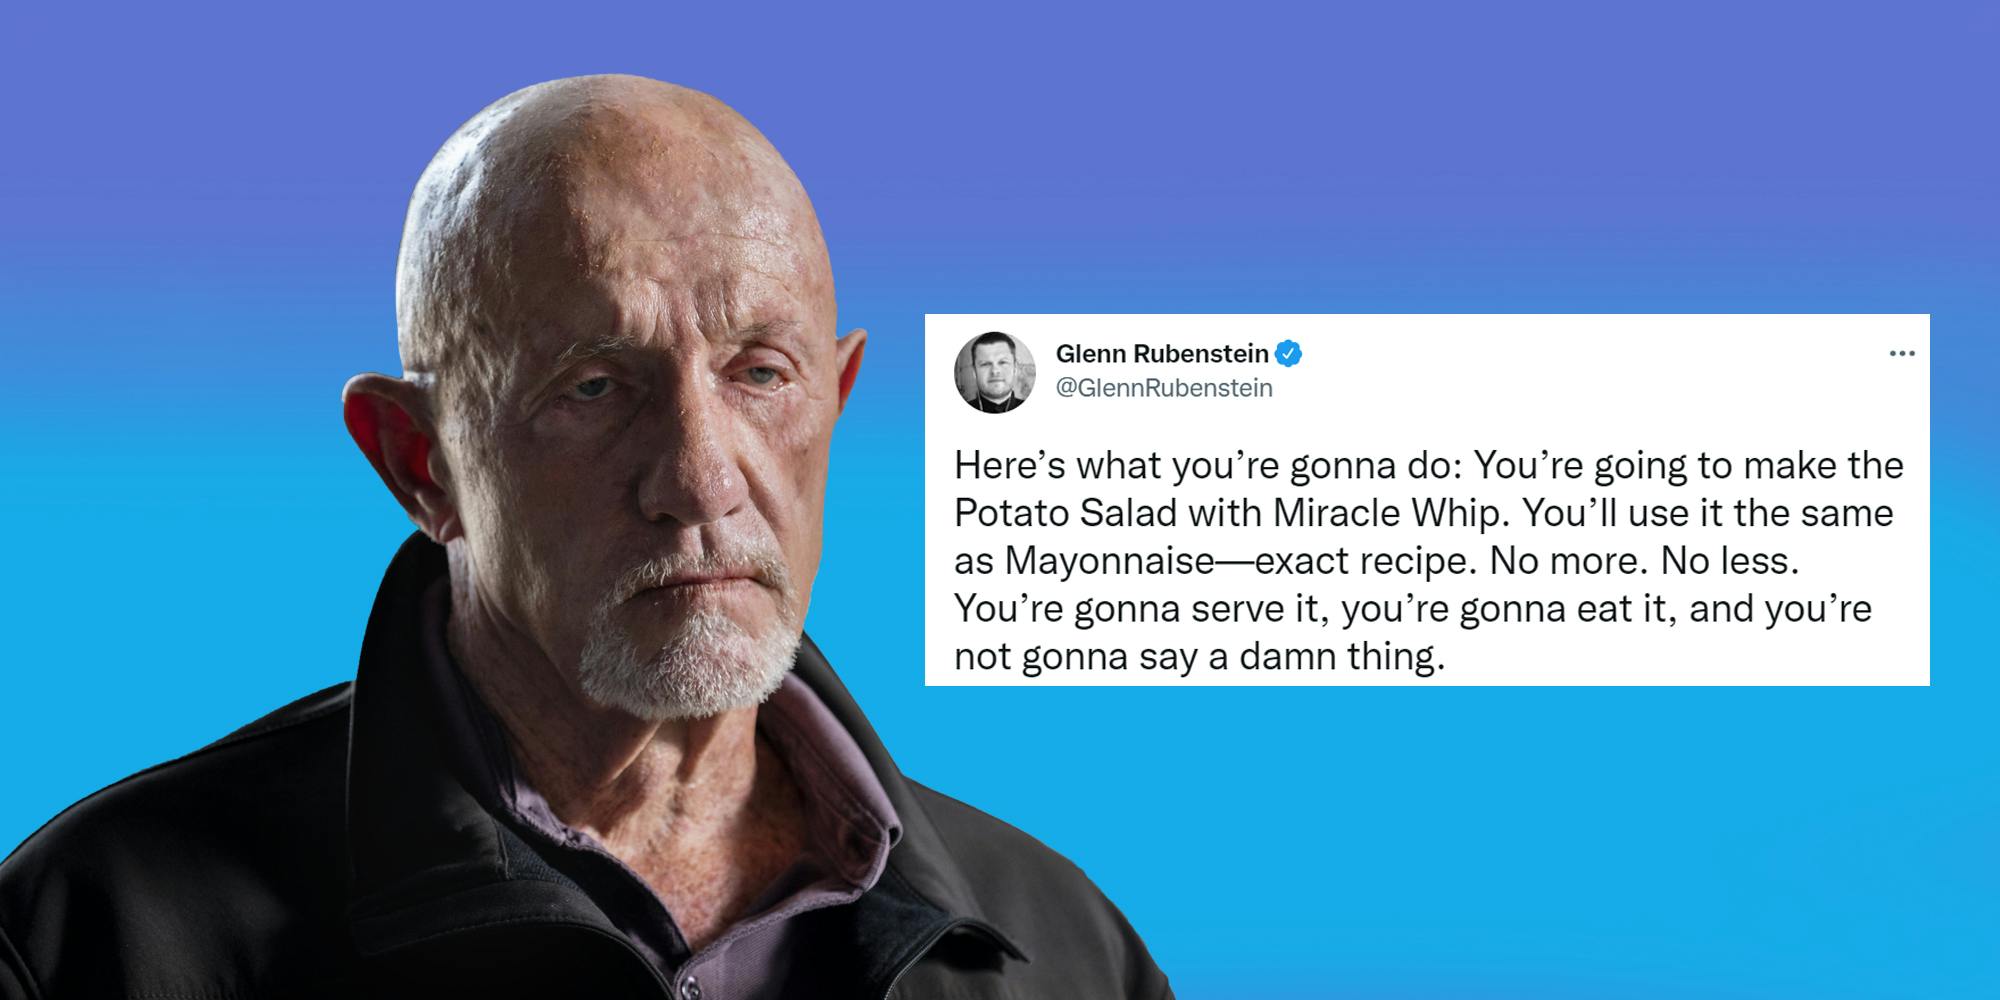 're gonna do Mike Ehrmantraut on blue background with Tweet by Glenn Rubenstein on right caption "Here's what you're gonna do: You're going to make the Potato Salad with Miracle Whip. You'll use it the same as Mayonnaise-exact recipe. No more. No less. You're gonna serve it, you're gonna eat it, and you're not gonna say a damn thing."